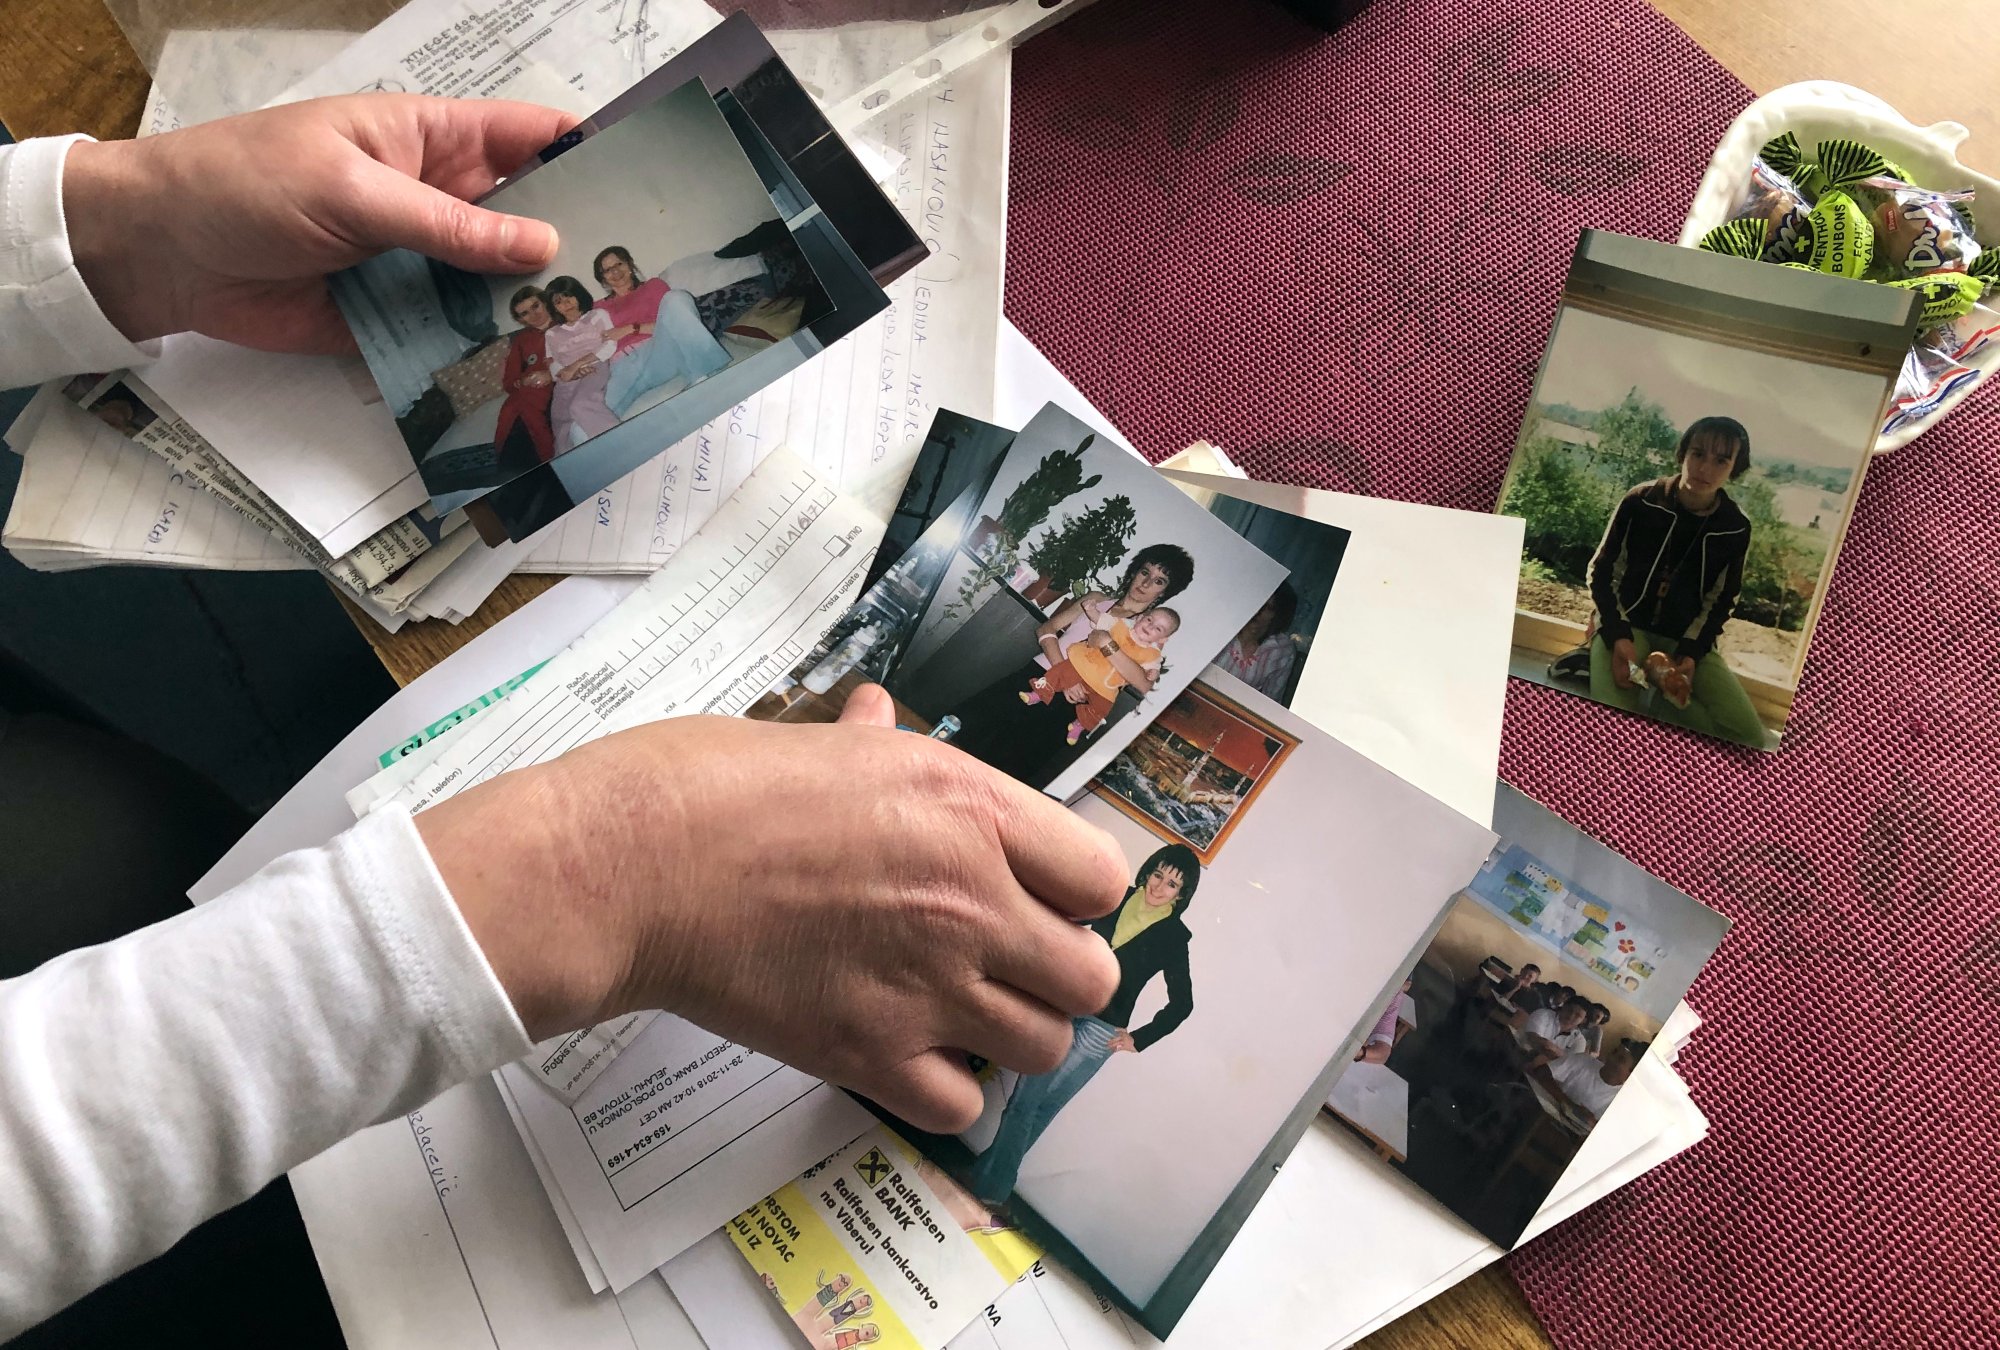 Alema Dolamic shows old photos of her sister Adela before she left for Syria (MEE/Elvira Jukic-Mujkic)